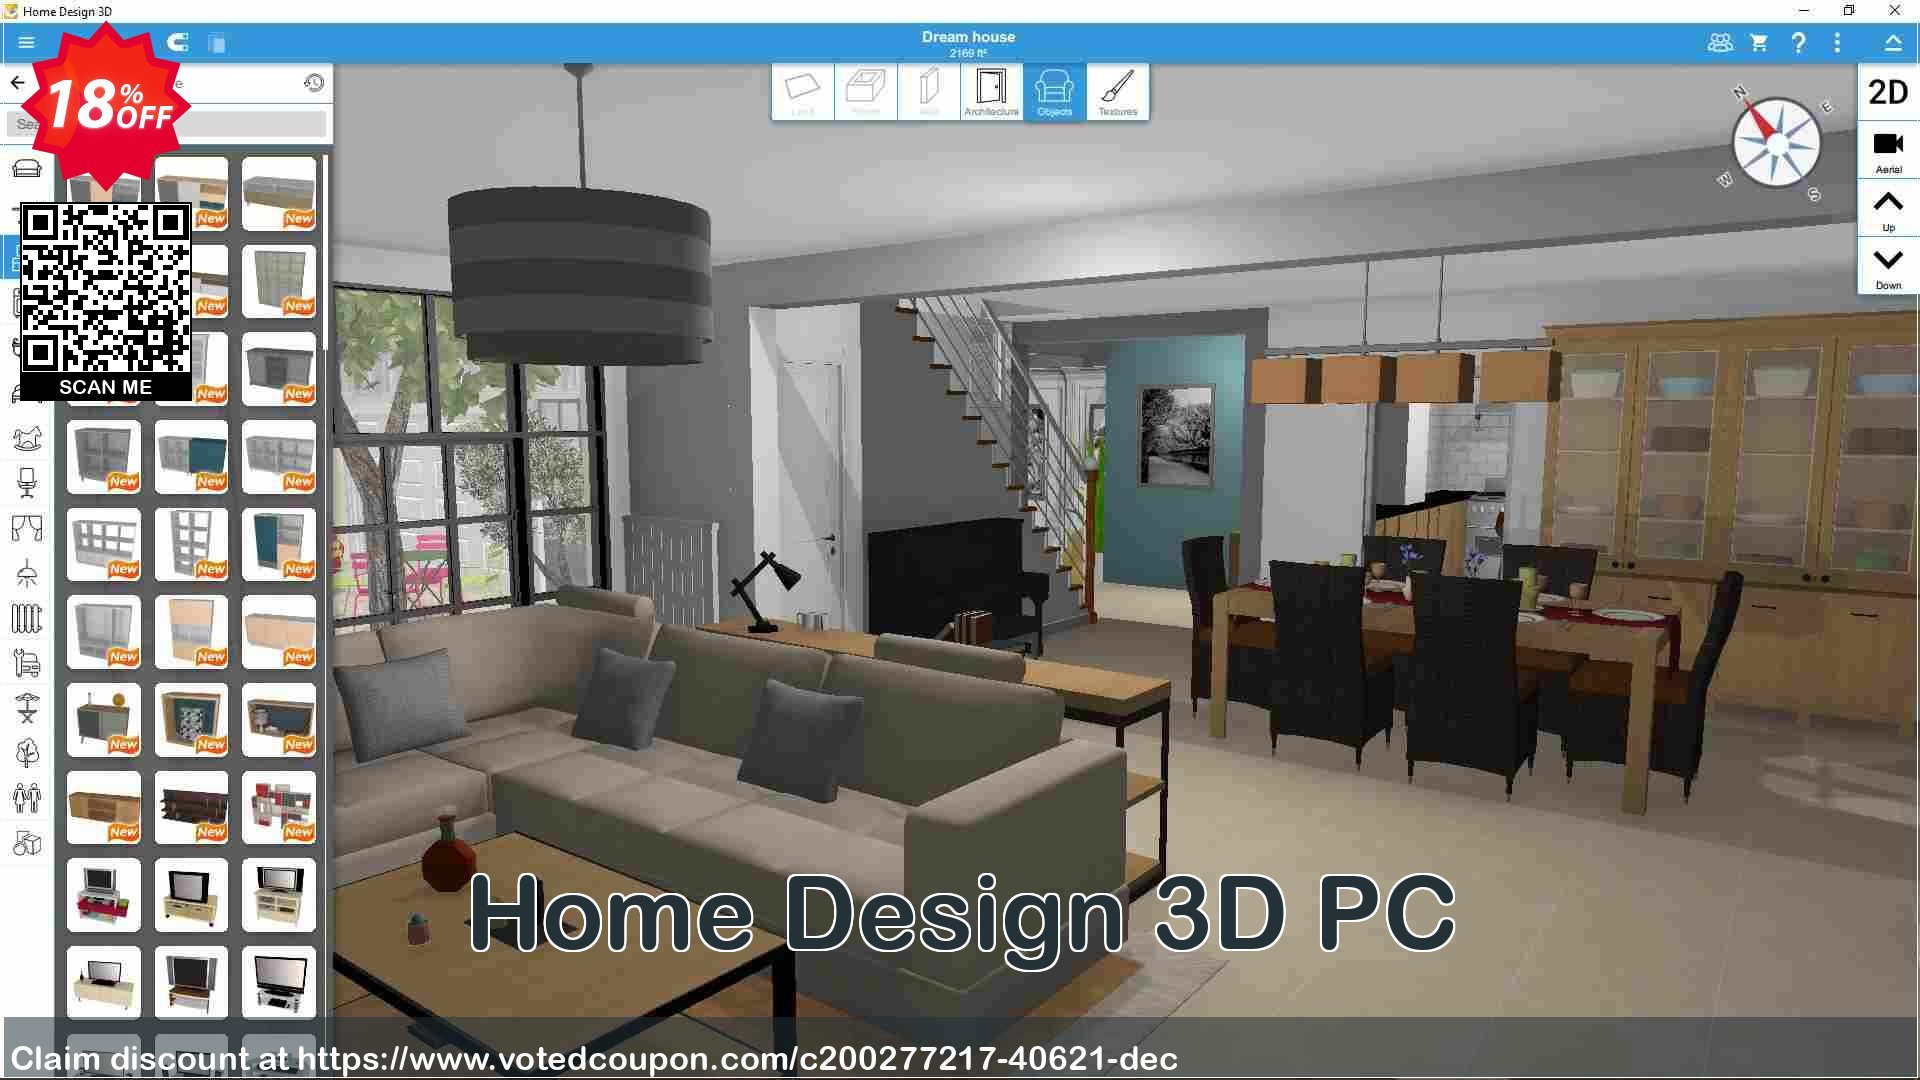 Home Design 3D PC Coupon Code May 2024, 18% OFF - VotedCoupon